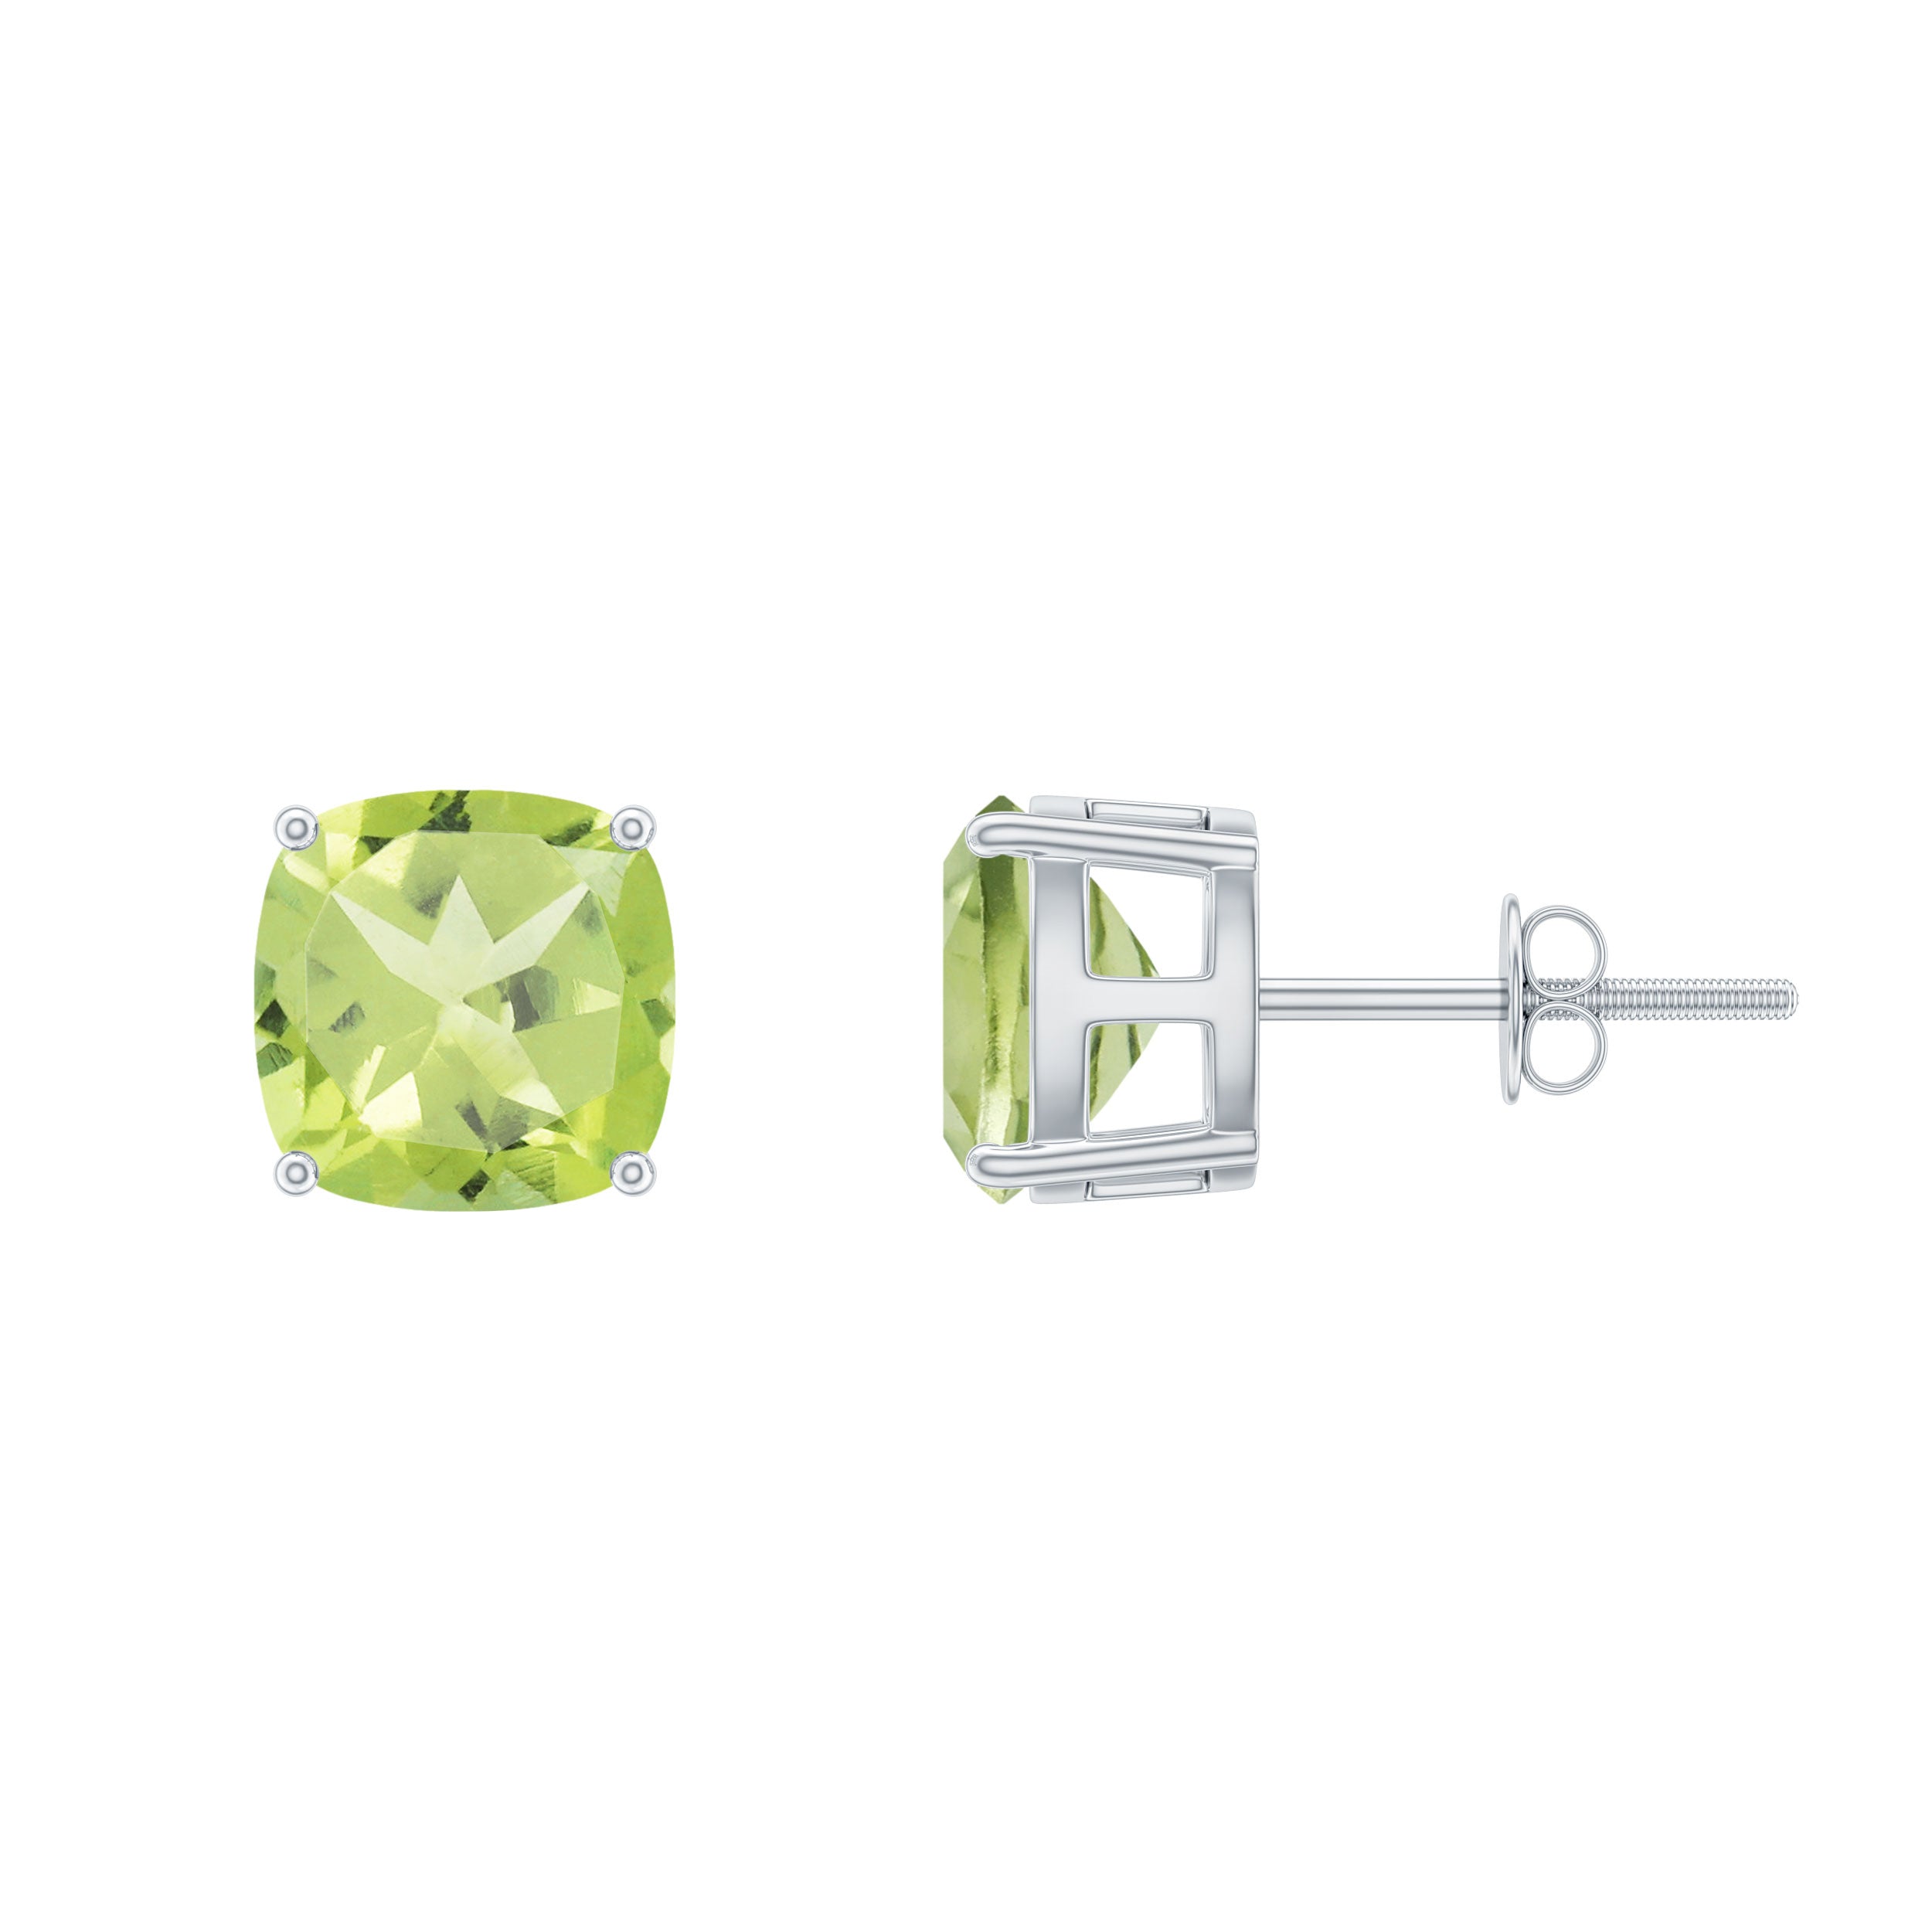 4.25 CT Cushion Cut Peridot Solitaire Stud Earrings in Silver Peridot - ( AAA ) - Quality 92.5 Sterling Silver - Rosec Jewels